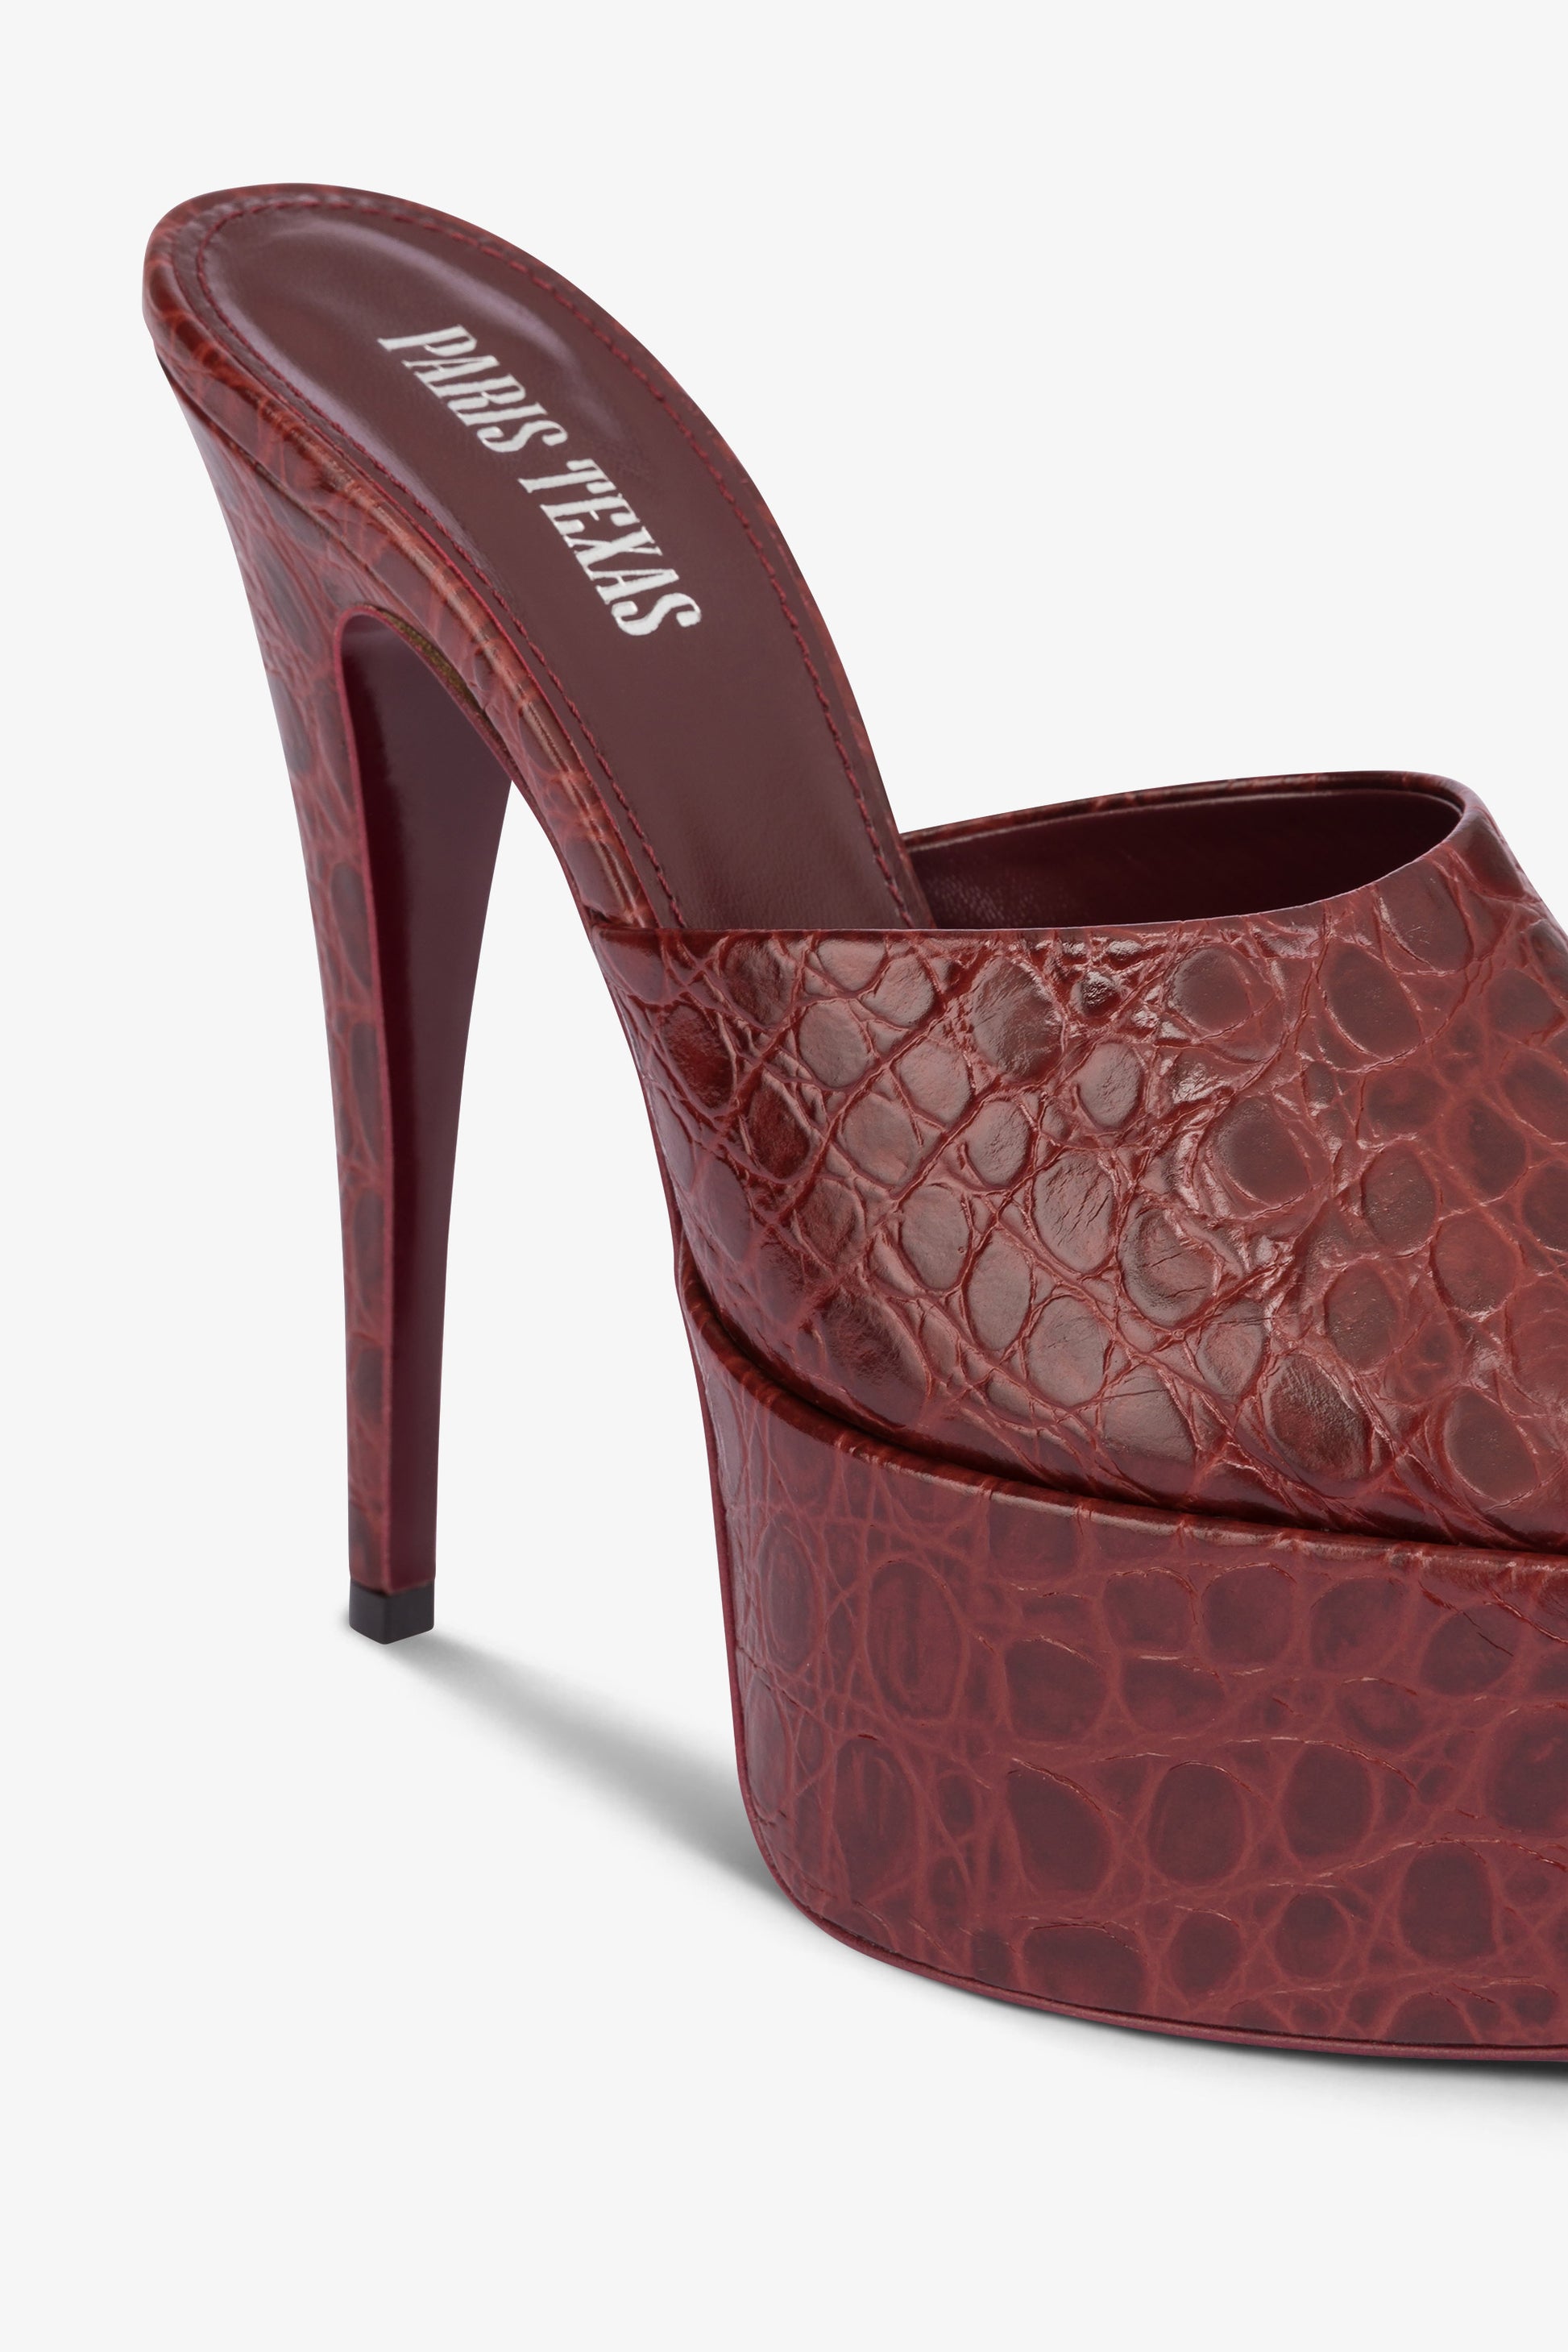 Almond-toe heeled mules in patent rouge noir leather